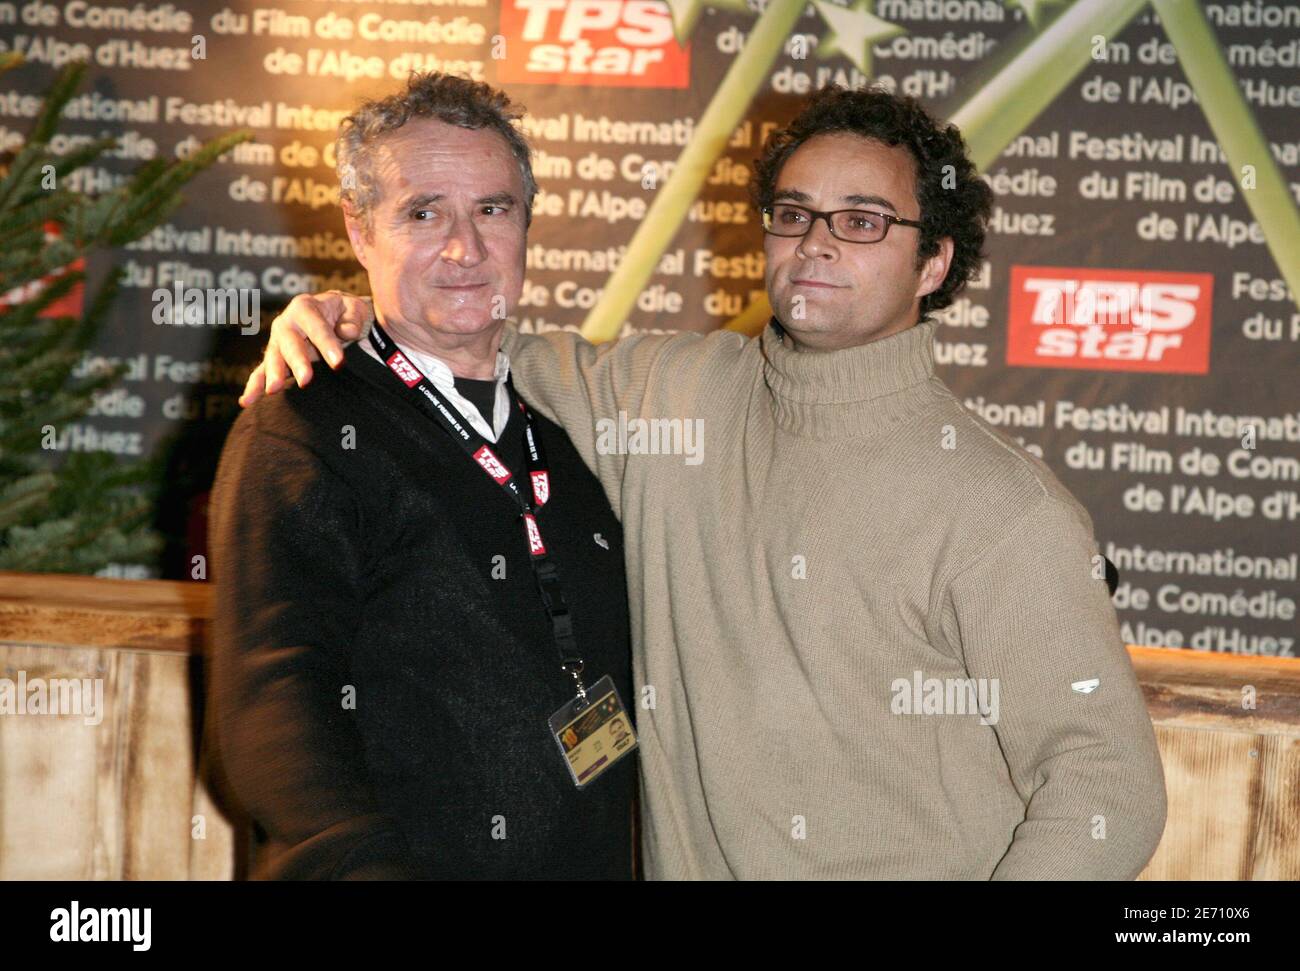 French director Soren Prevost and his father French actor Daniel Prevost pose during the photocall at the 10th International Comedy Film Festival in L'Alpe d'Huez, France, on January 17, 2007. Photo by Guibbaud-Guignebourg/ABACAPRESS.COM Stock Photo